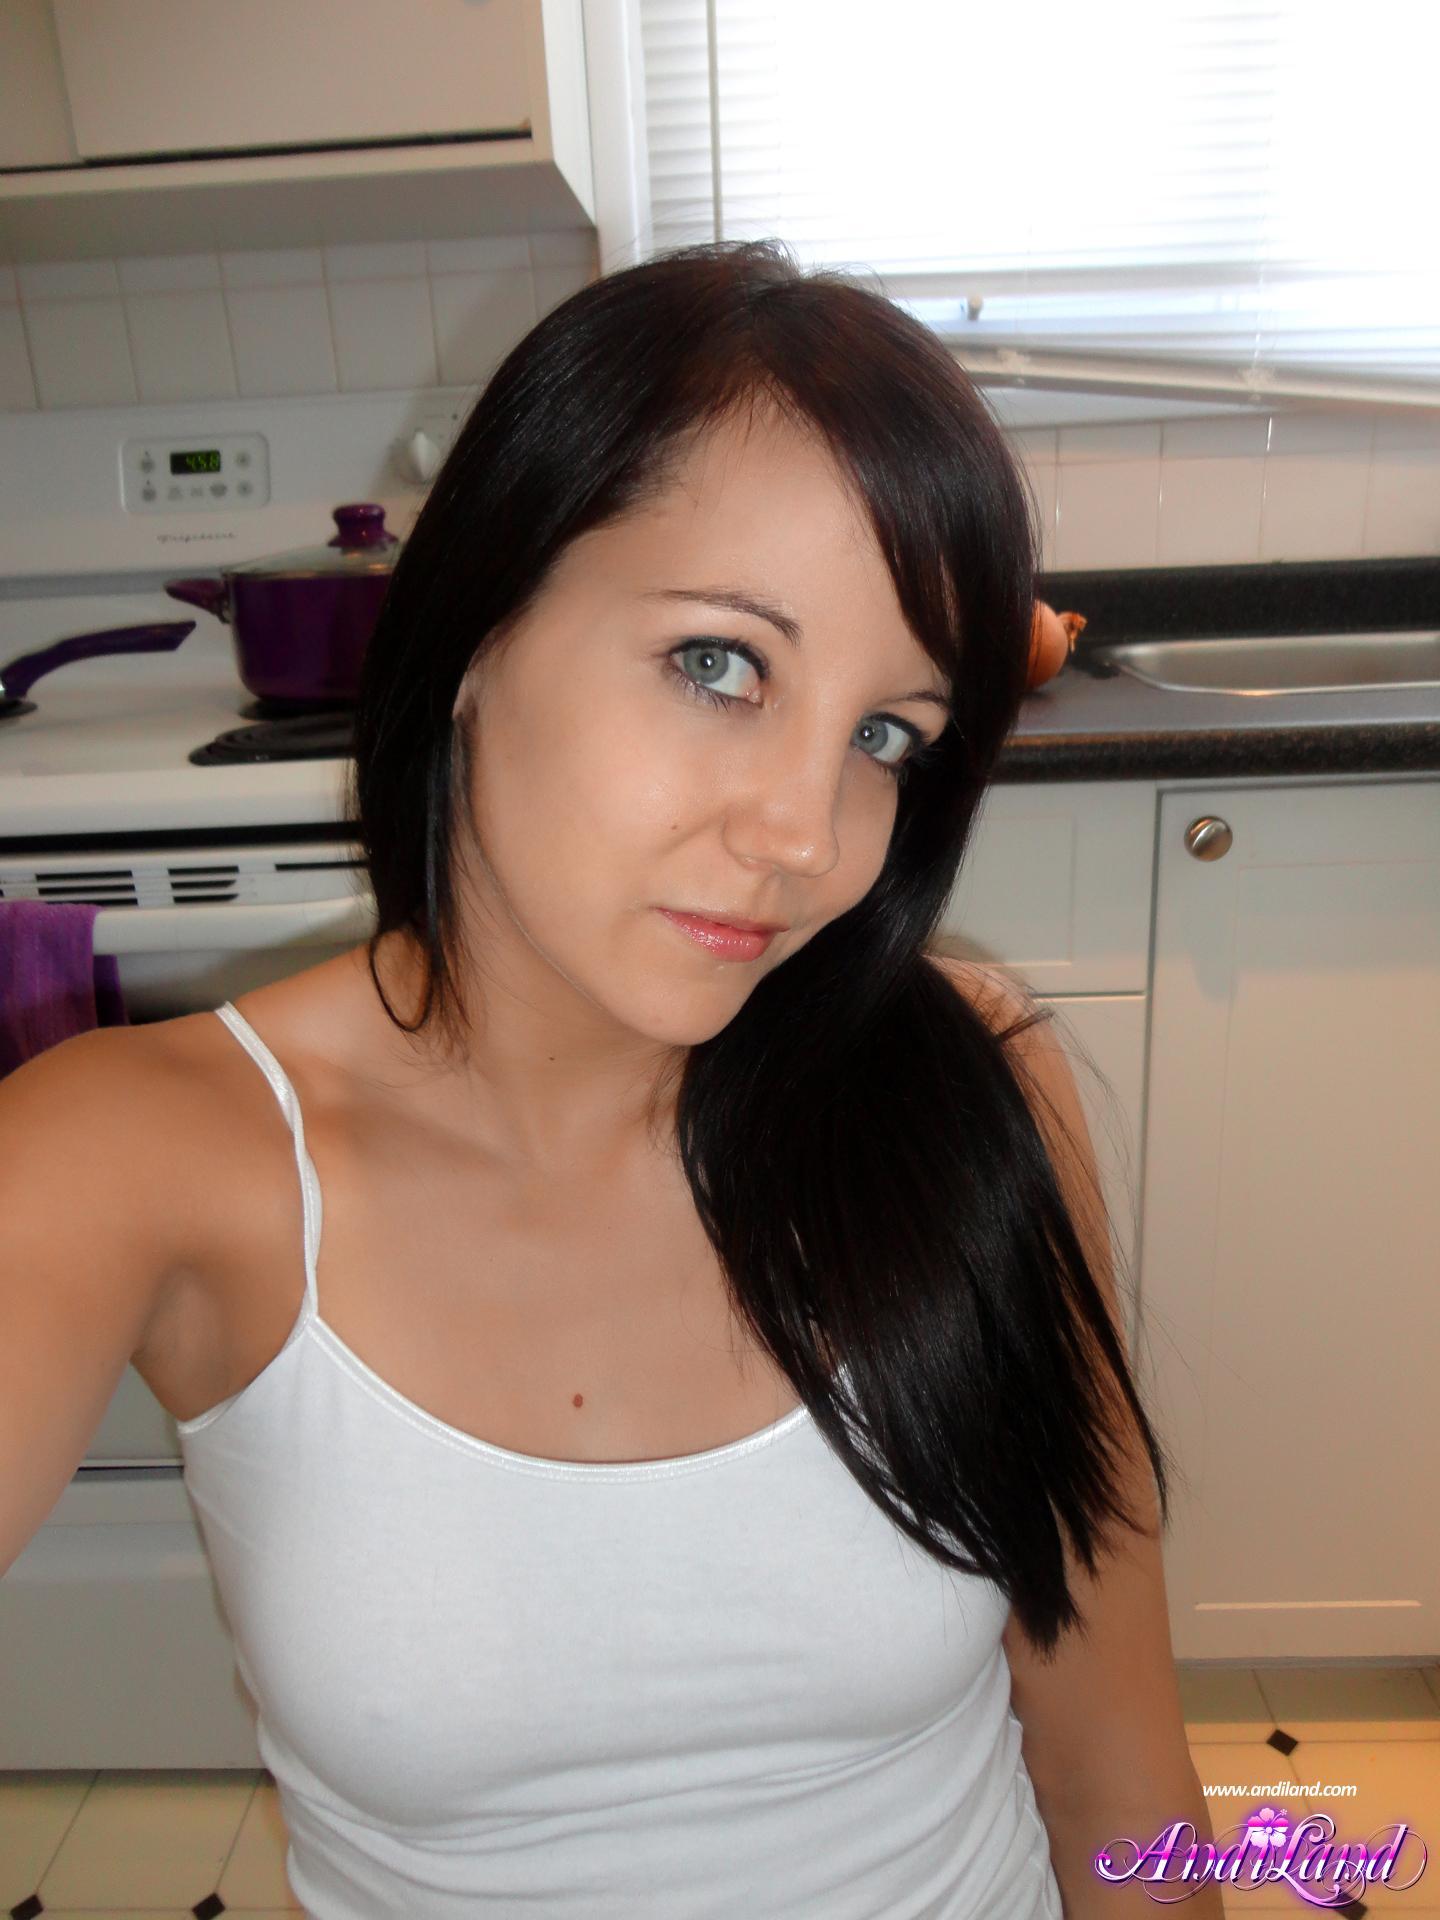 Brunette teen Andi gets a little horny cooking pasta #53140560